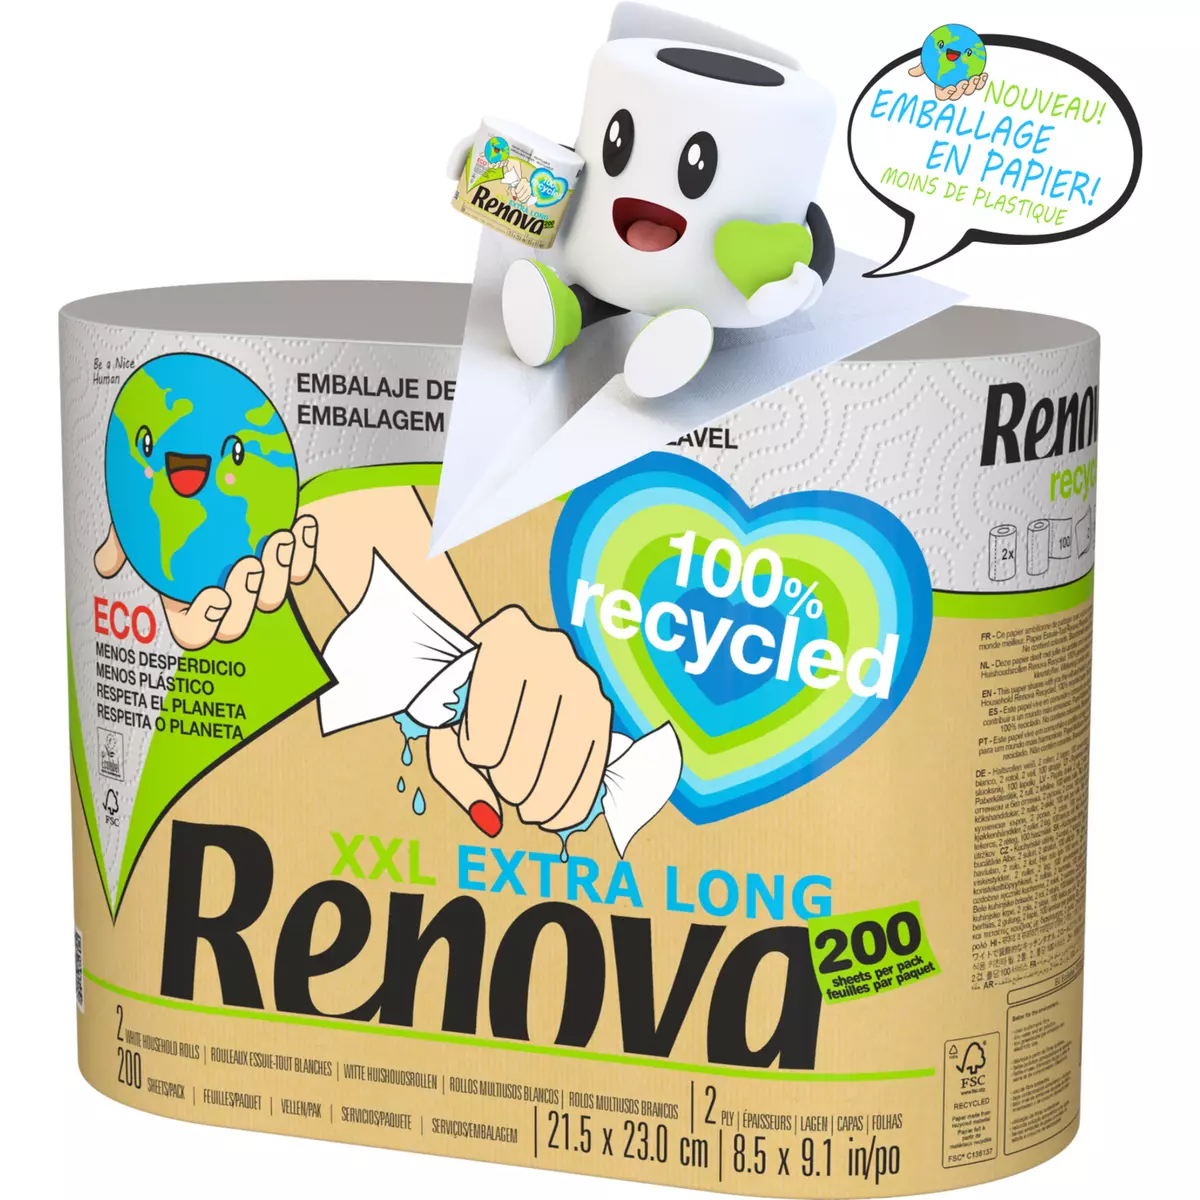 RENOVA Essuie tout blanc XXL extra long 100% recycled 2 rouleaux